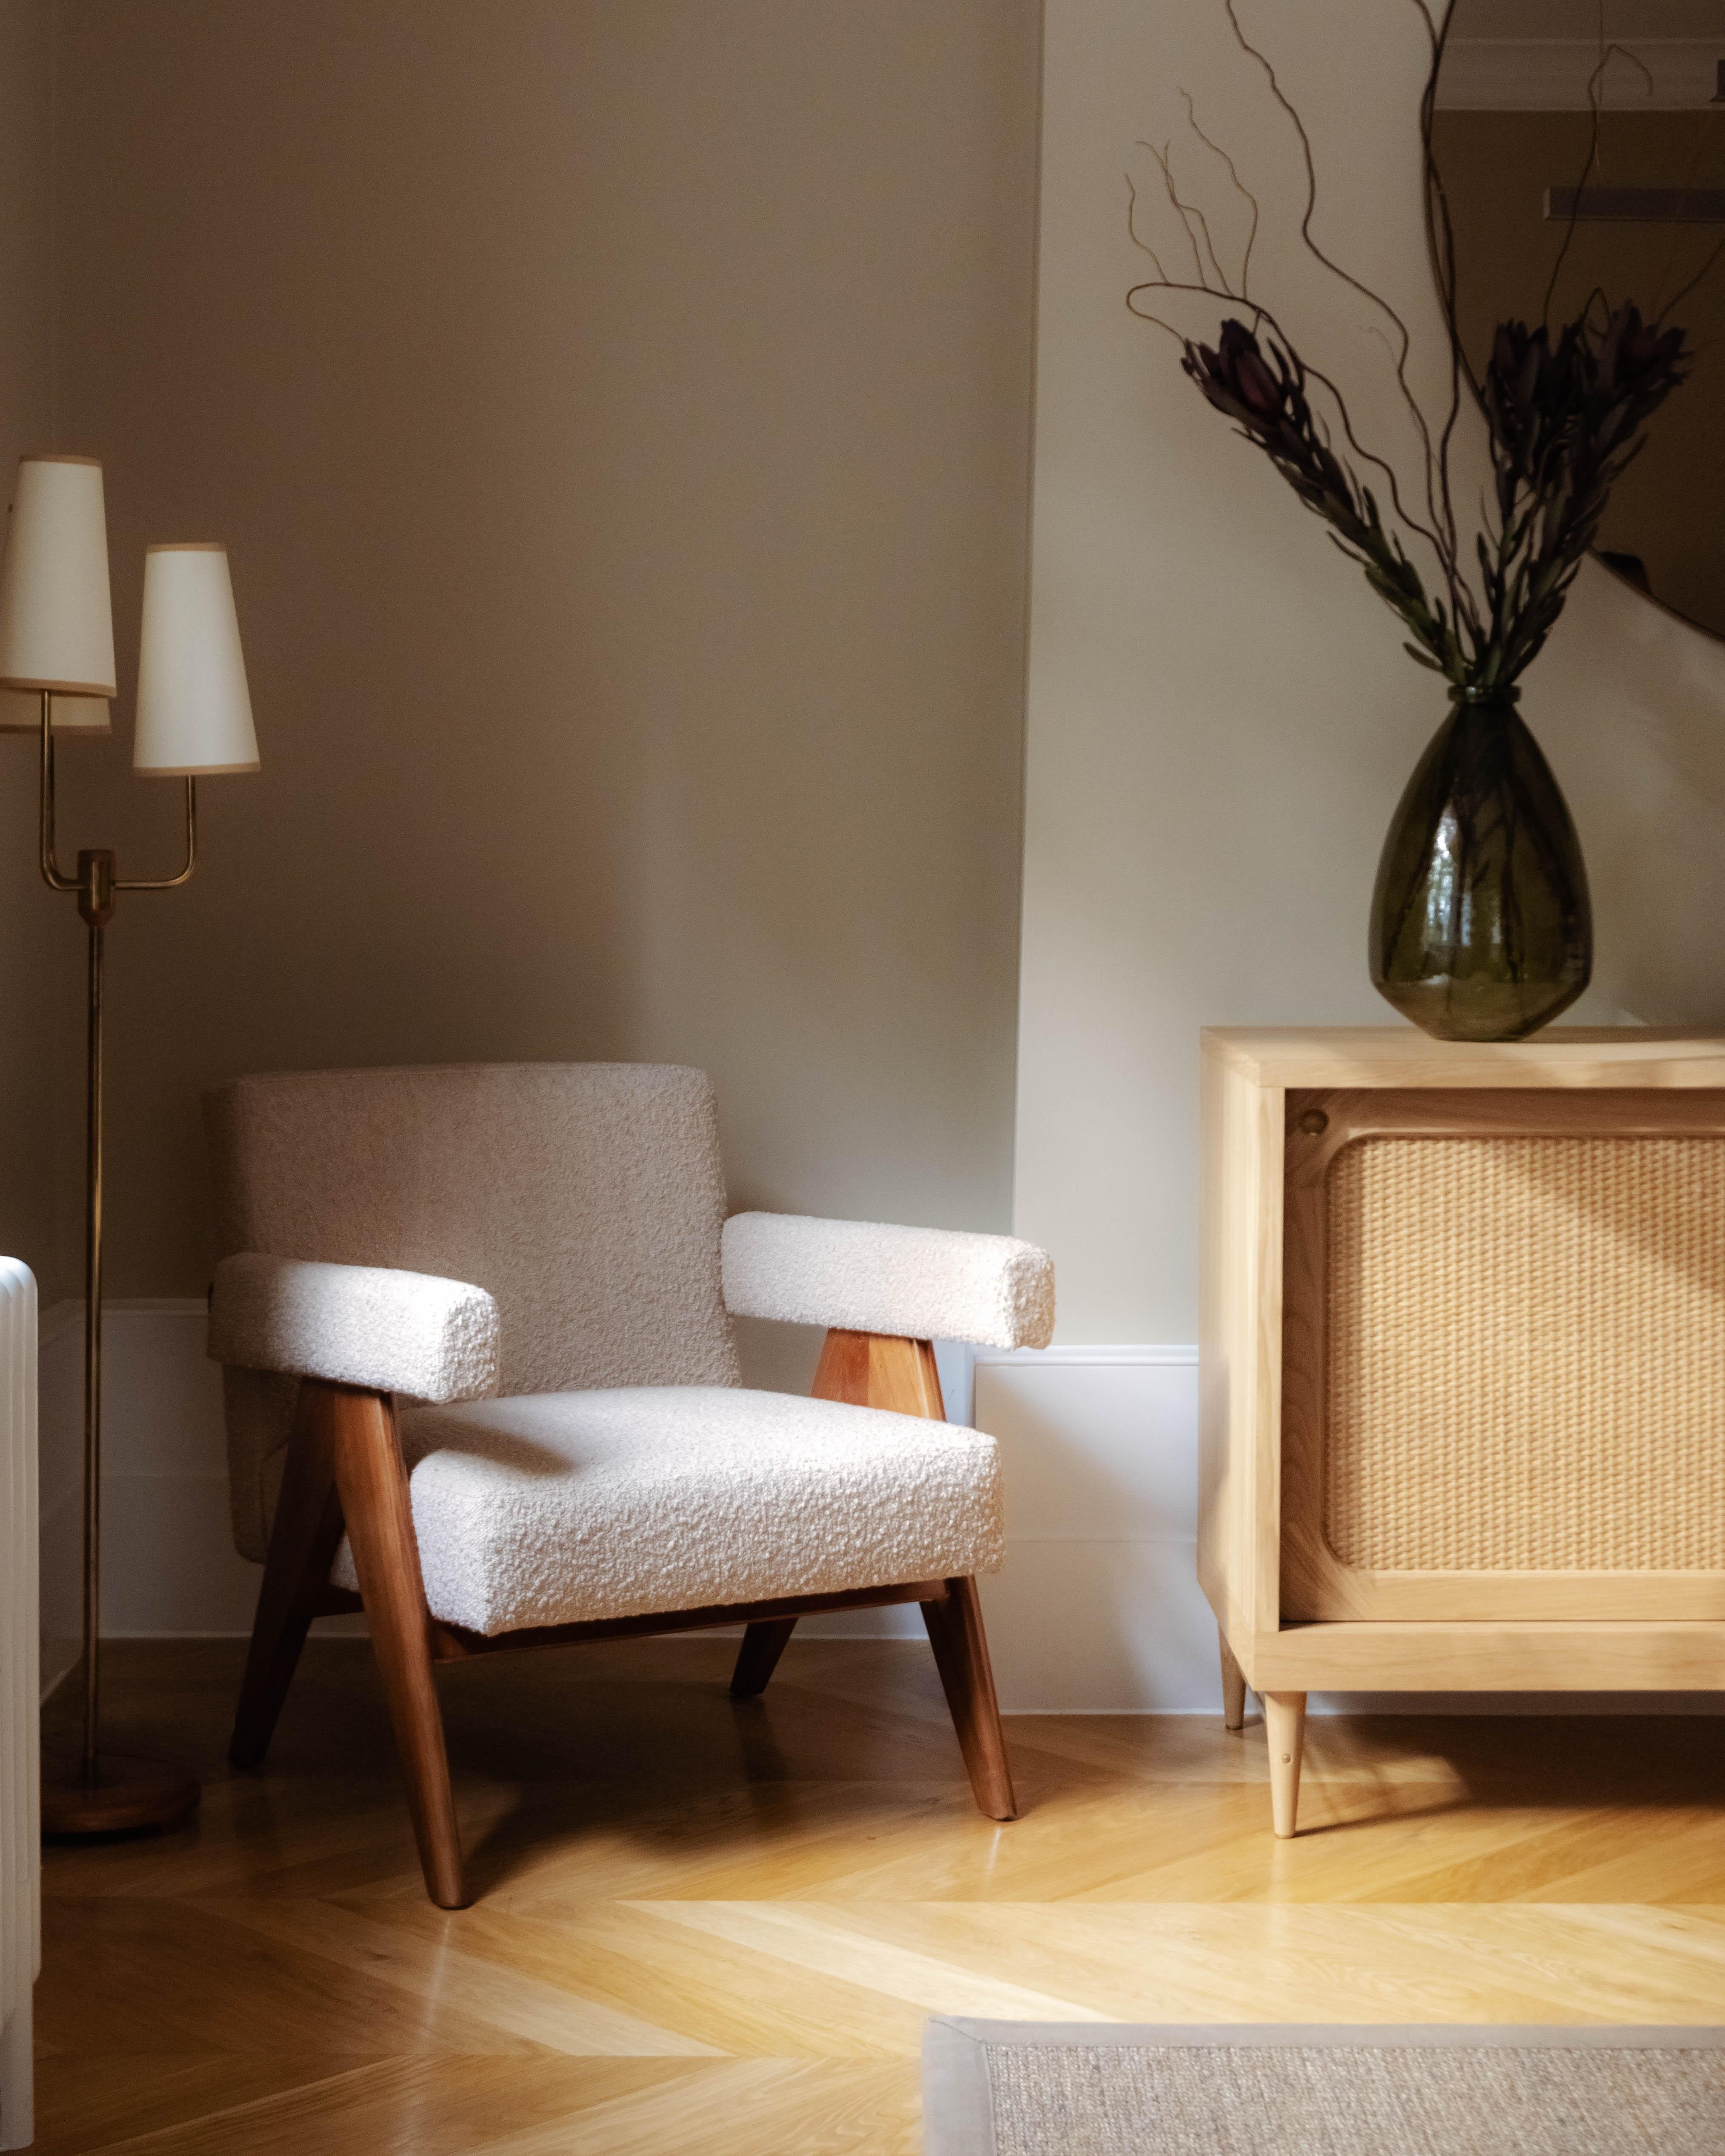 A sideboard in European oak and rattan, developed by Lind + Almond especially for Sanders, Copenhagen's premier luxury boutique hotel.

Available in two timber tones, Cognac and Natural Oak. Handcrafted to order in Europe. Internally there are two